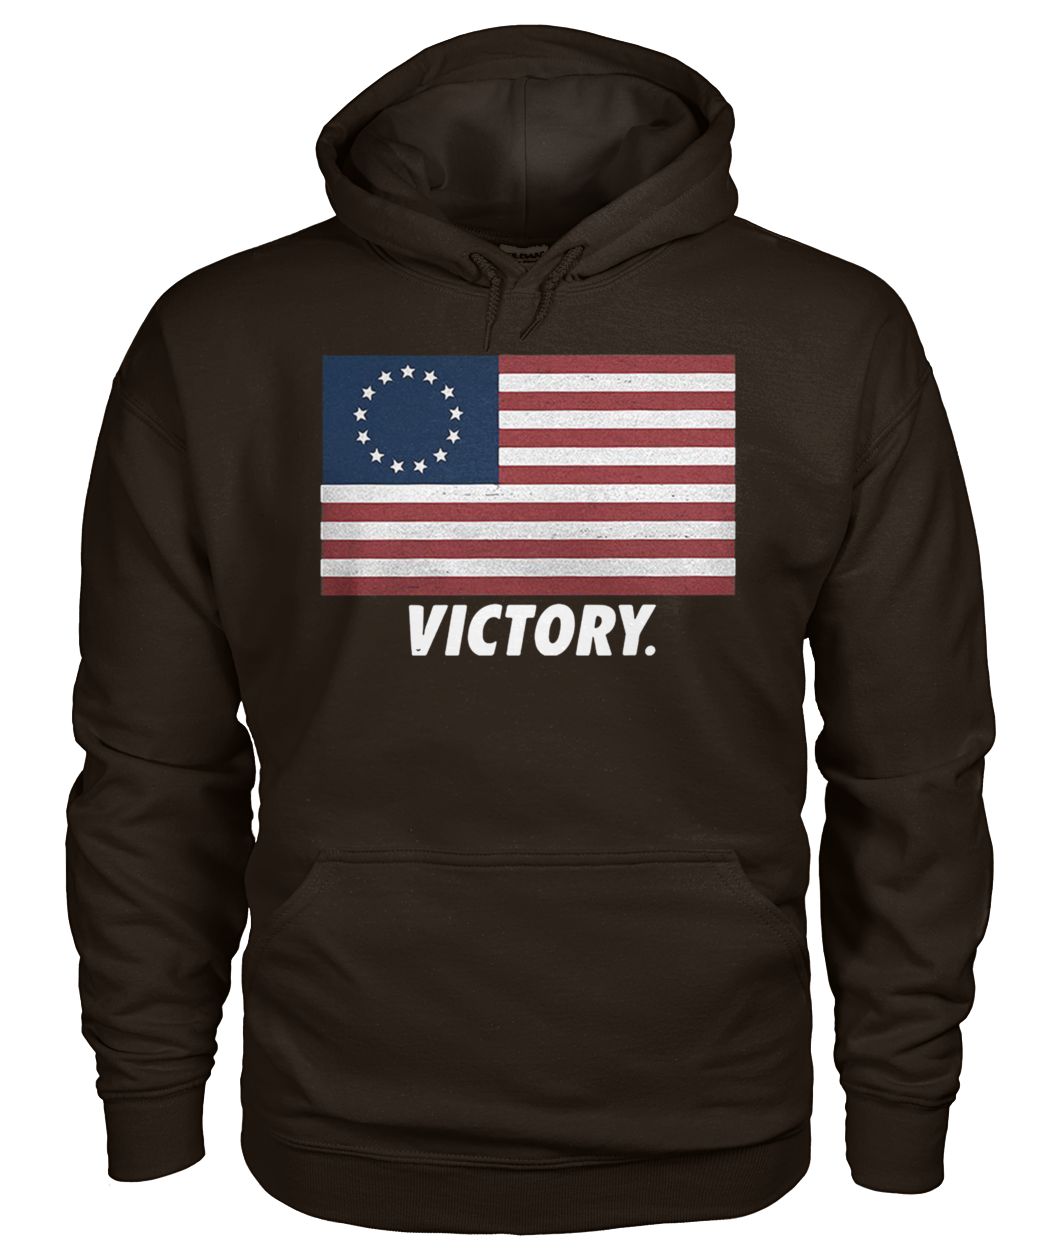 Betsy ross flag the first american flag victory gildan hoodie